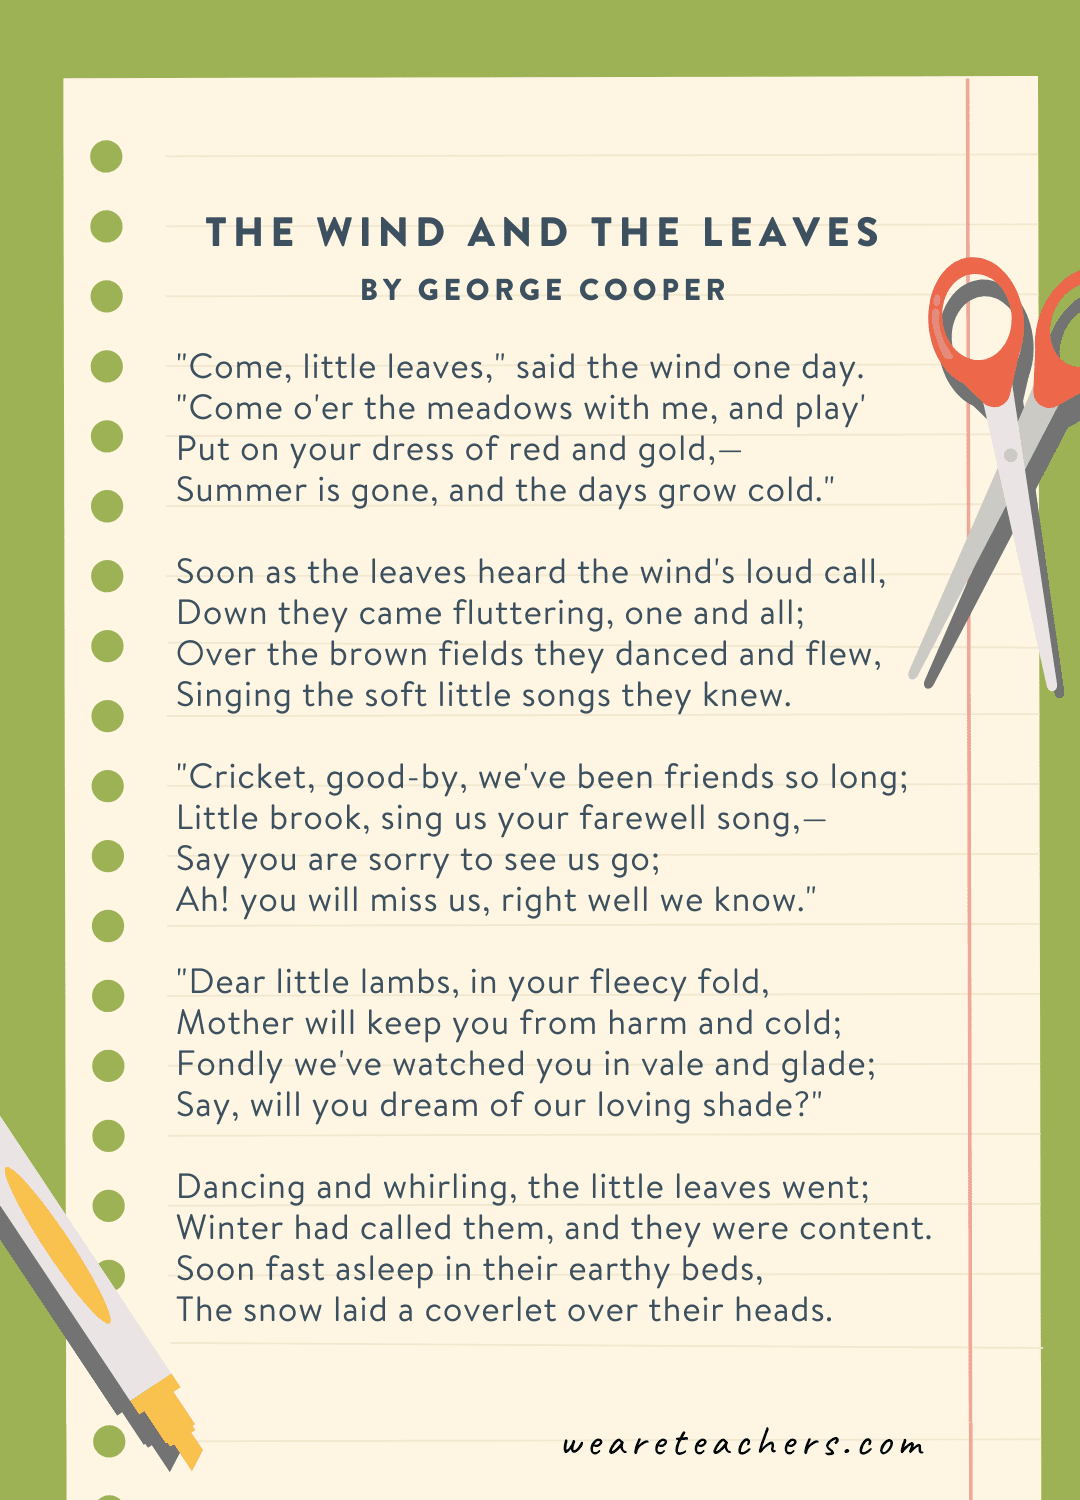 Example of 3rd grade poems: The Wind and the Leaves by George Cooper